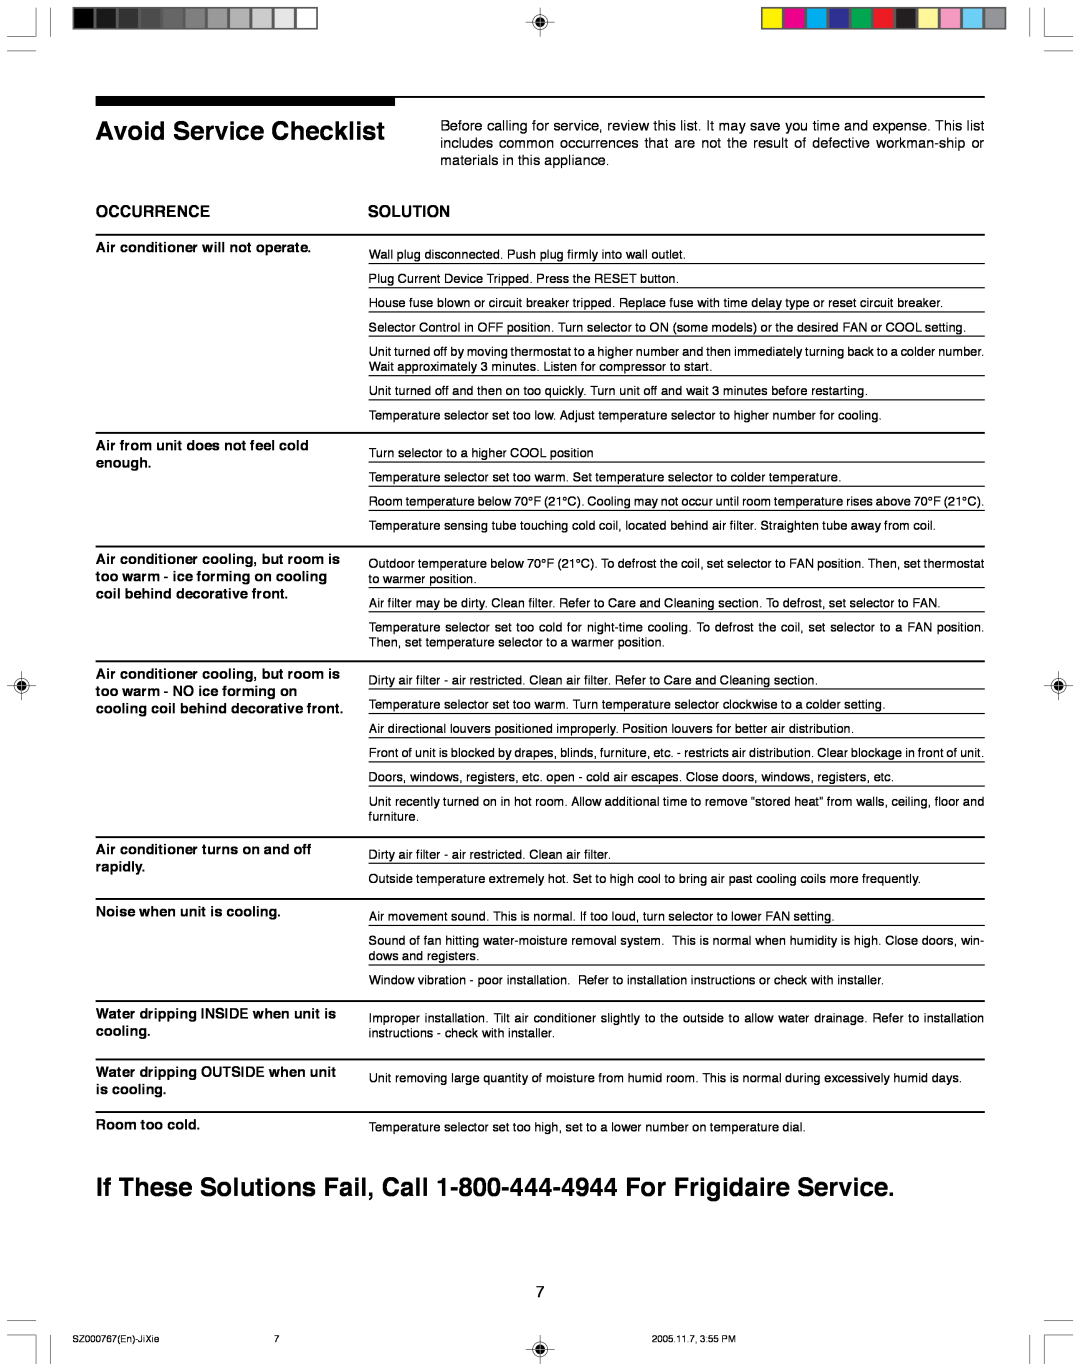 Frigidaire 220202D044 manual Avoid Service Checklist, If These Solutions Fail, Call 1-800-444-4944 For Frigidaire Service 